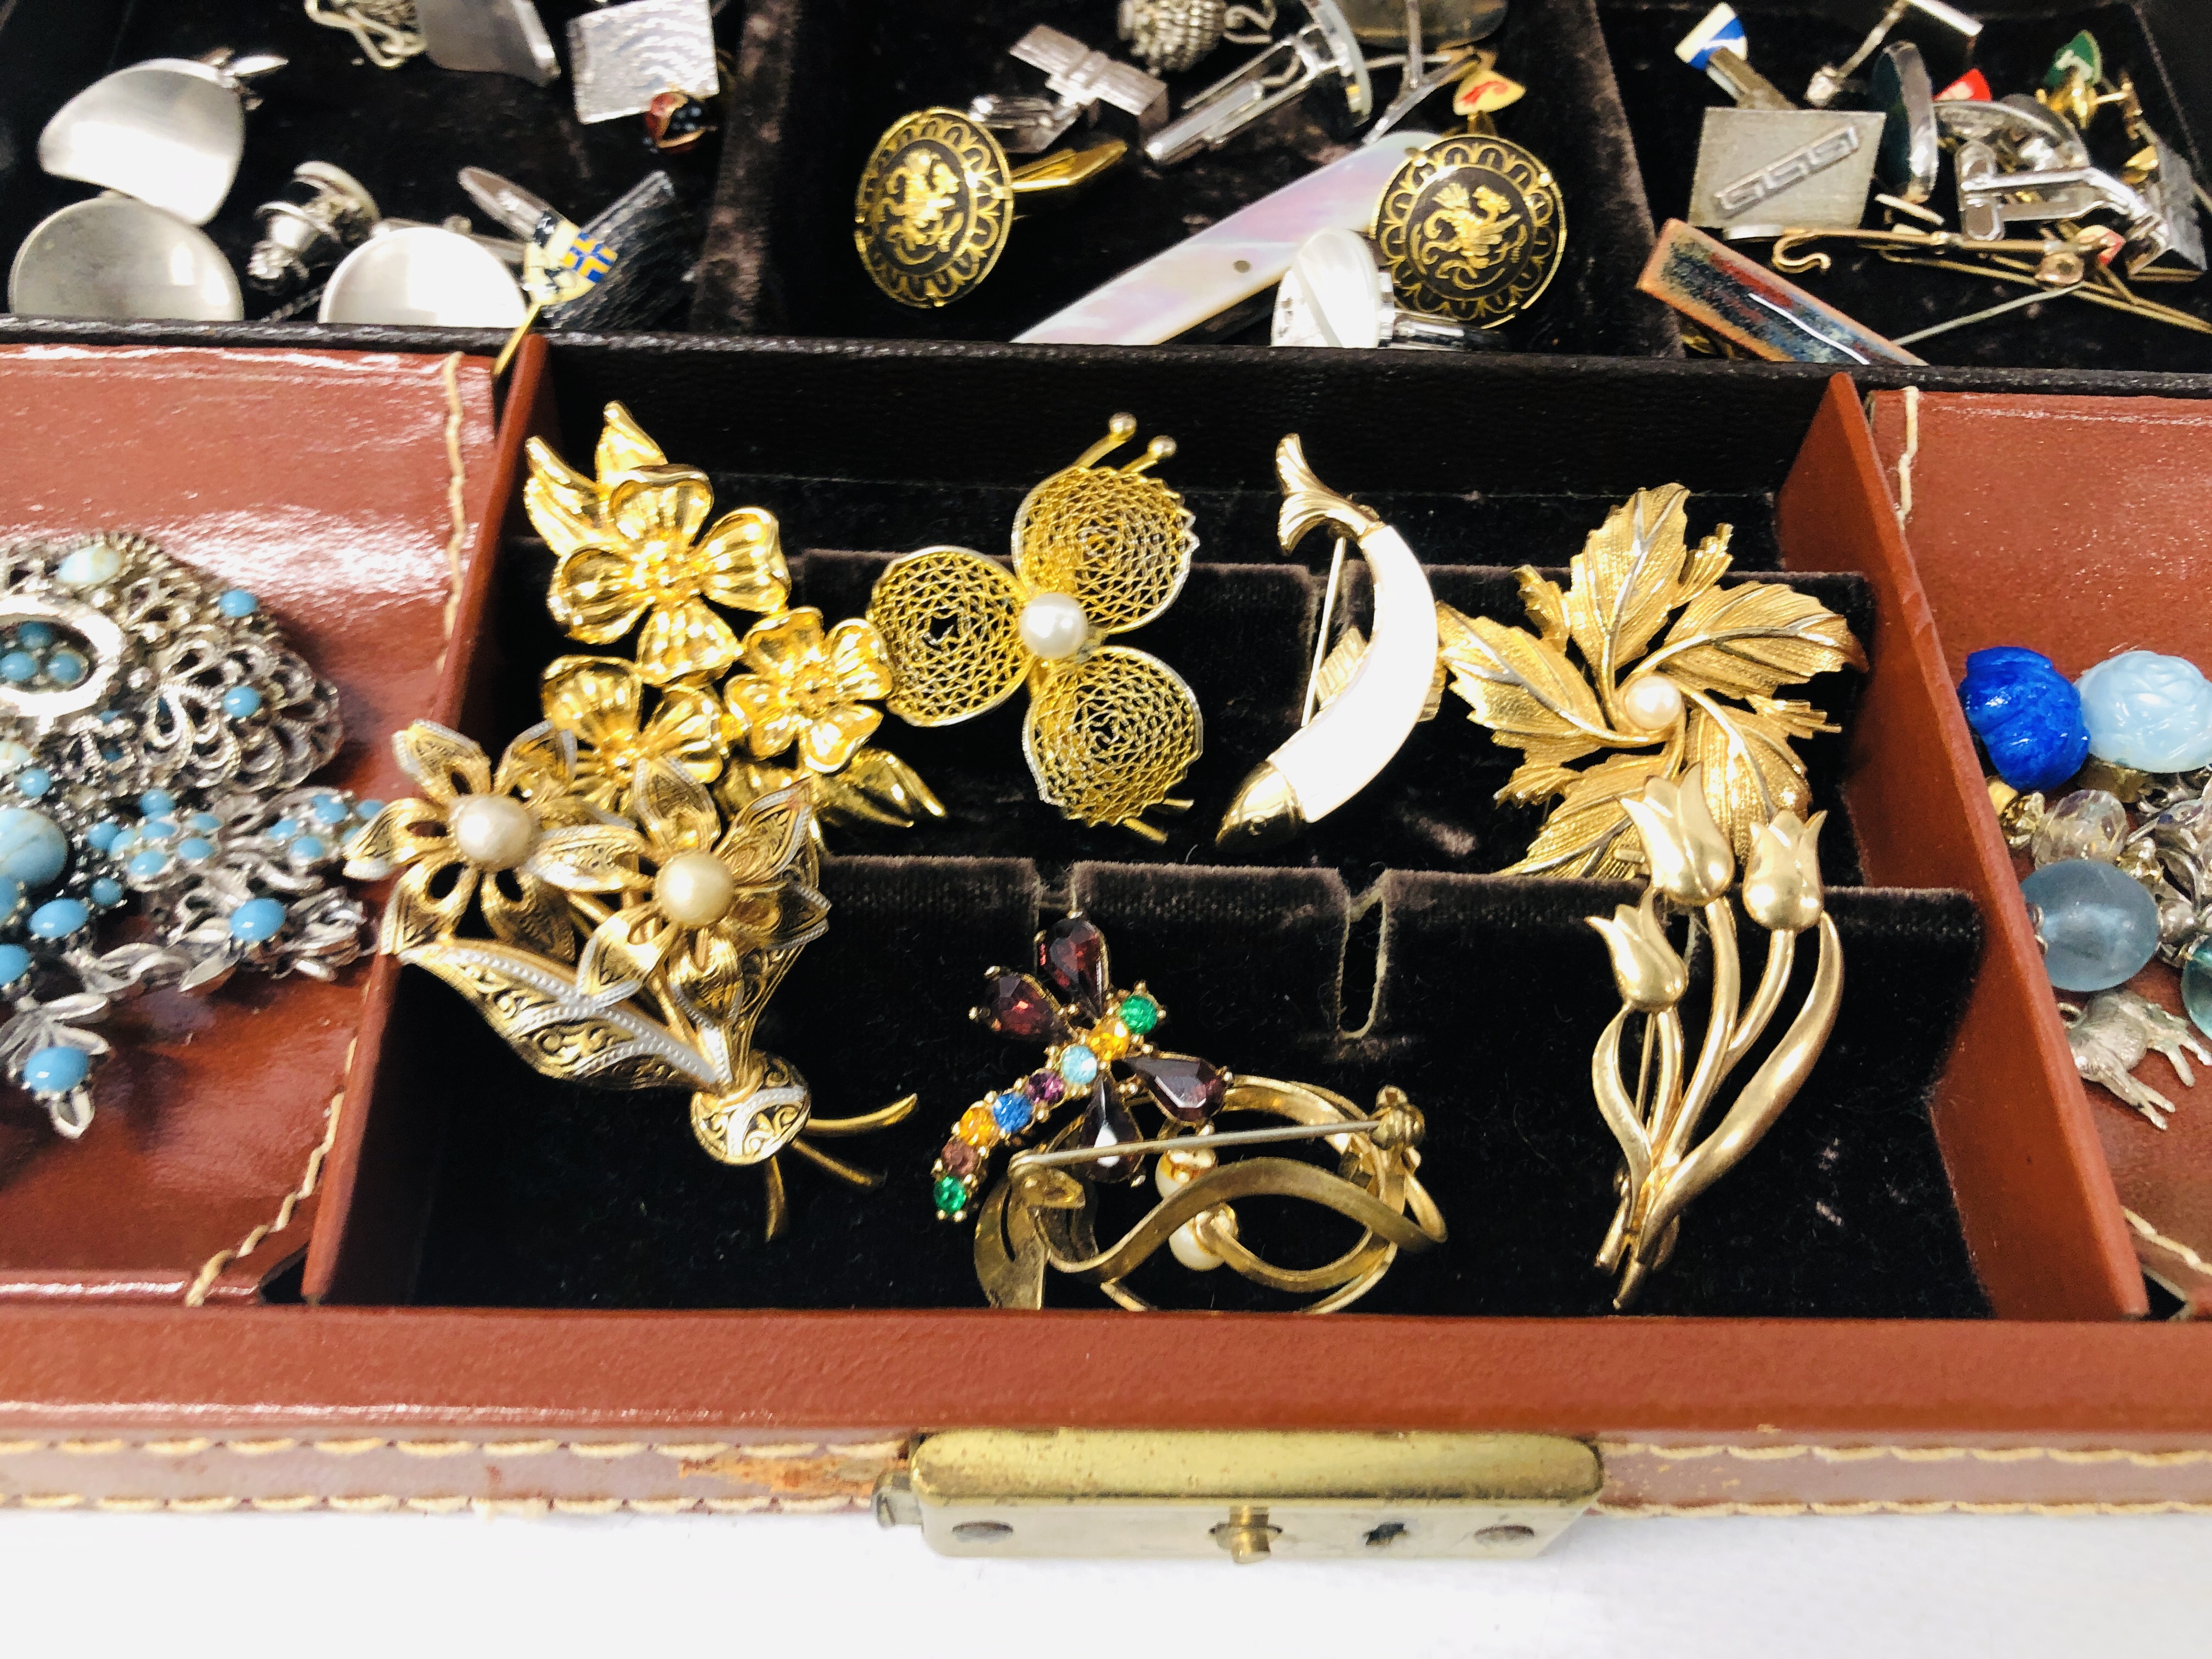 A CASE OF LADIES AND GENT'S JEWELLERY, BROOCHES, CUFF LINKS ETC. - Image 5 of 9